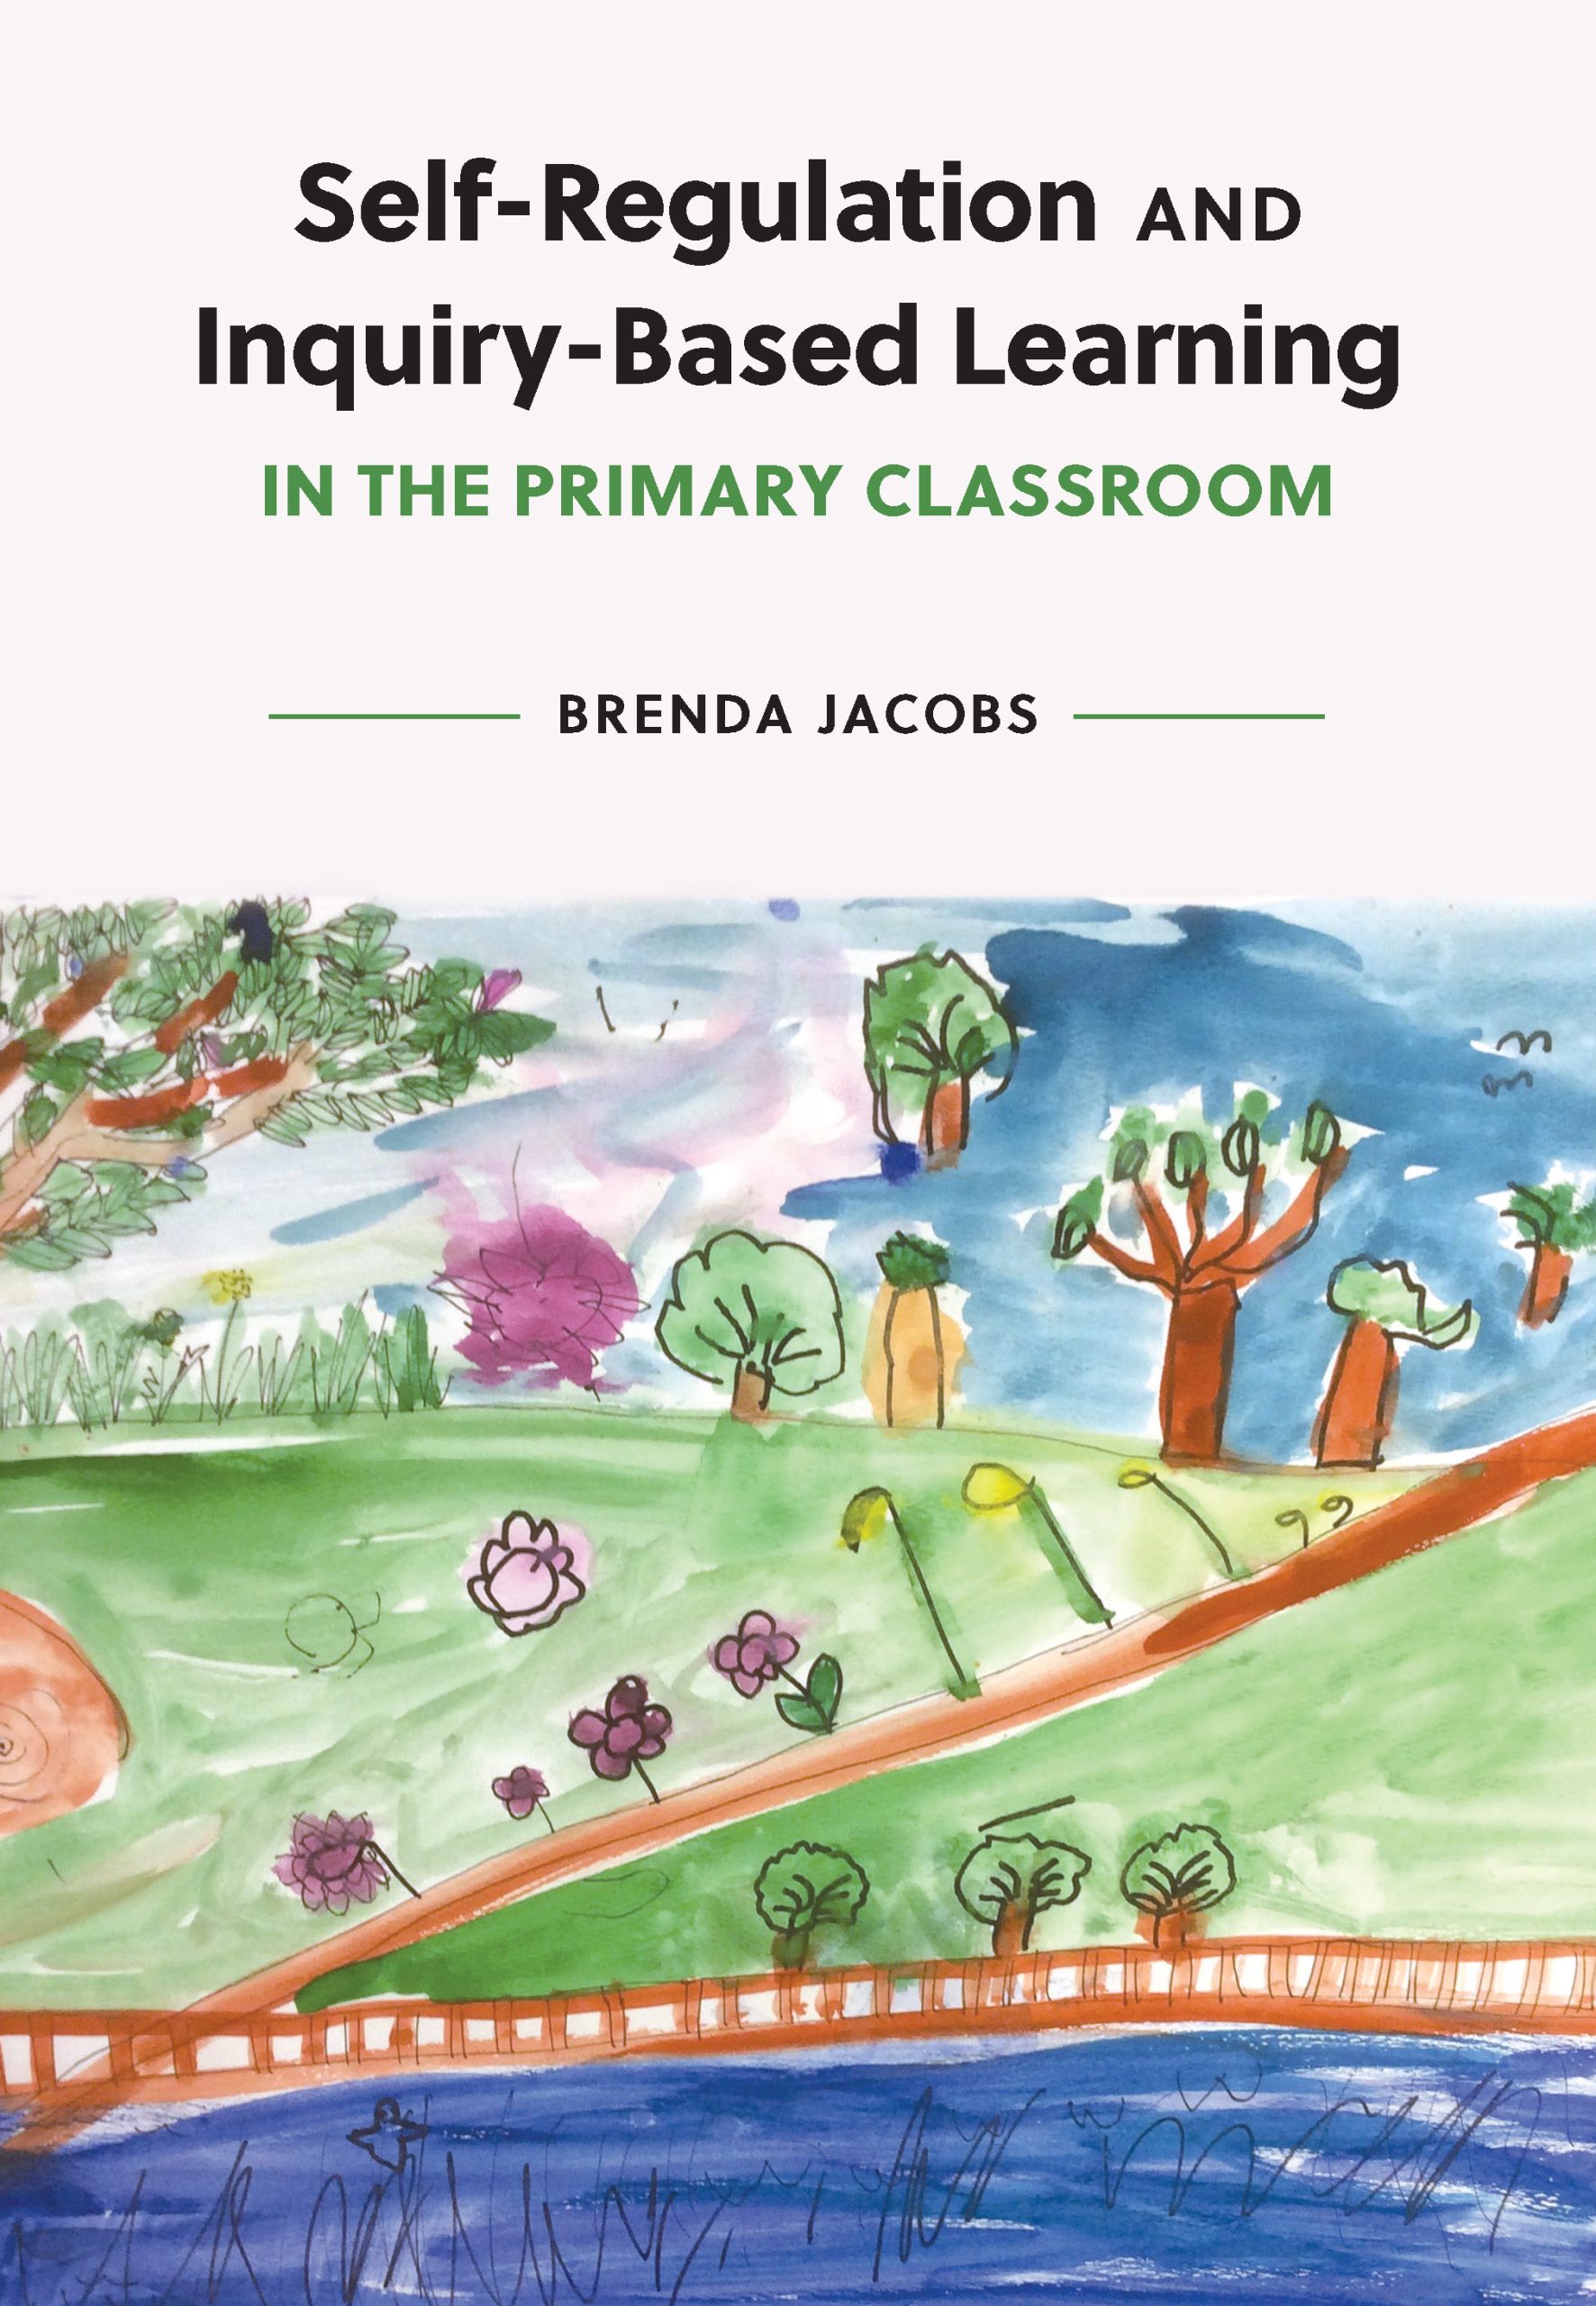 Cover image for "Self-regulation and inquiry-based learning in the primary classroom" book.